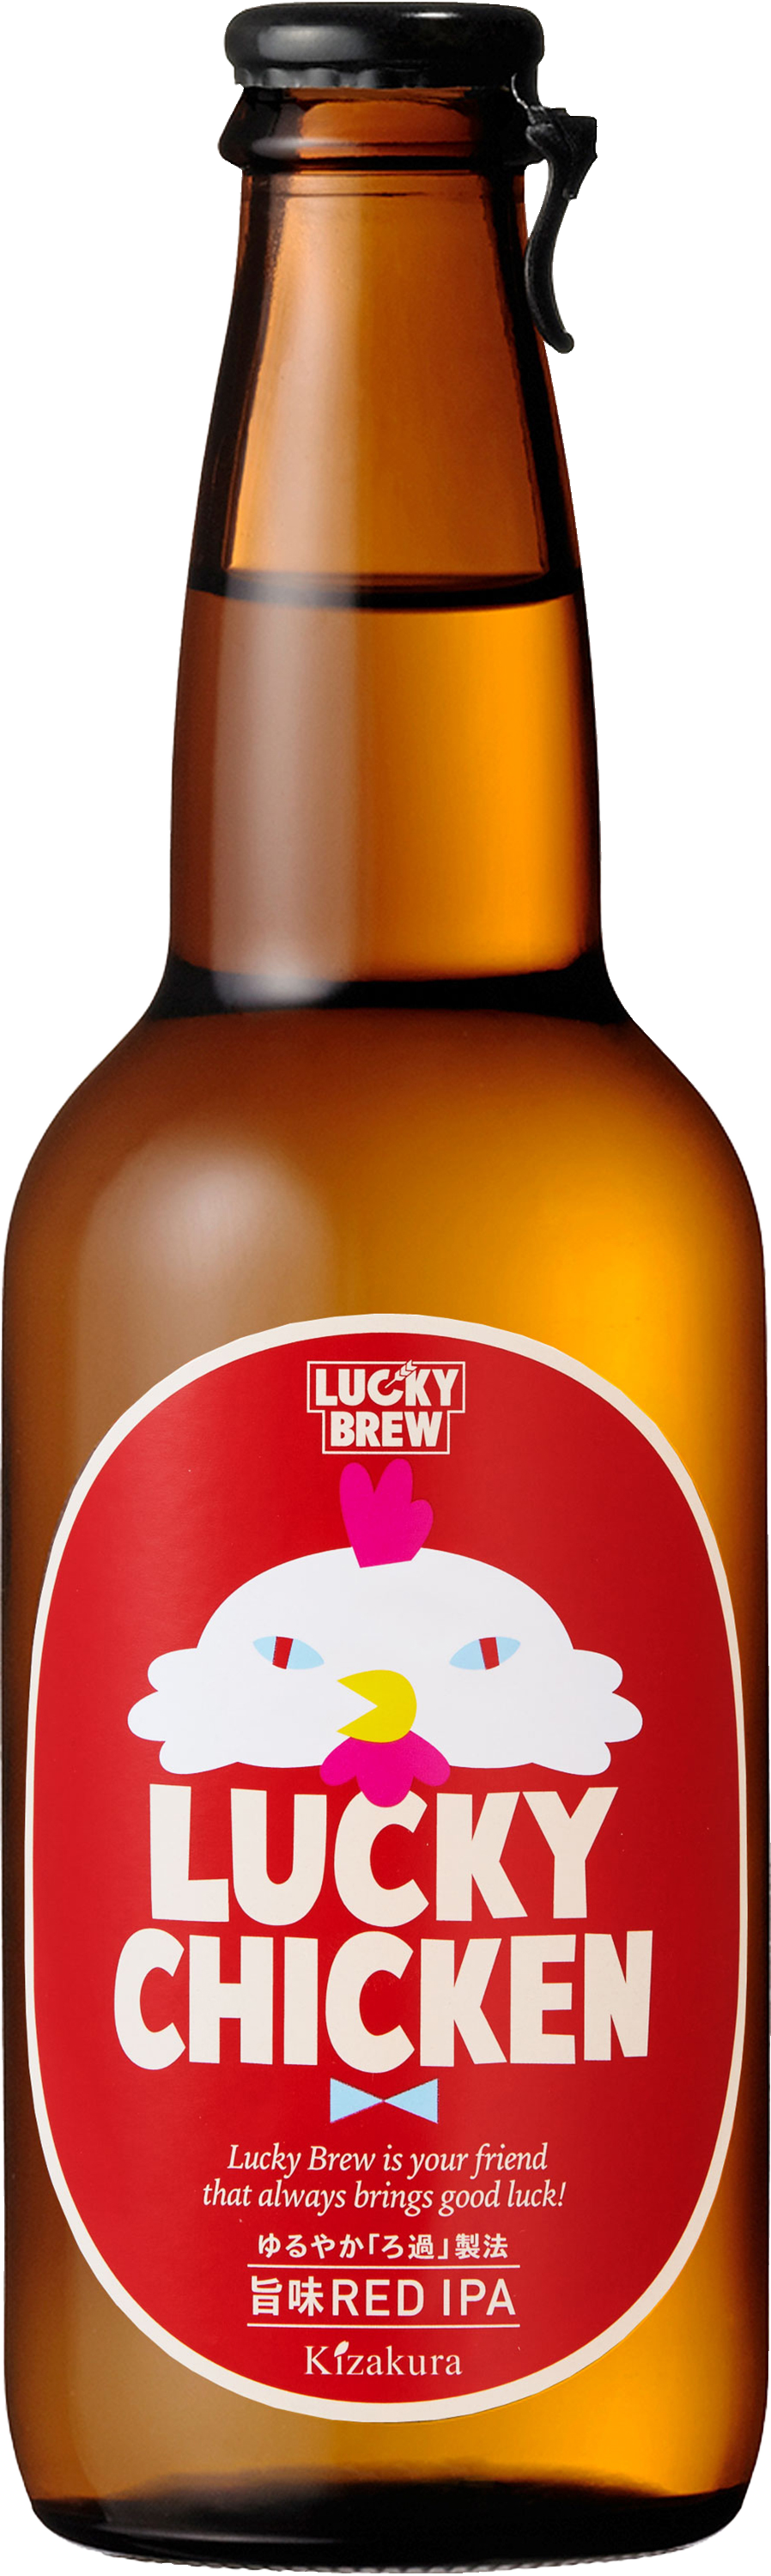 LUCKY CHICKEN RED IPA BOTTLE